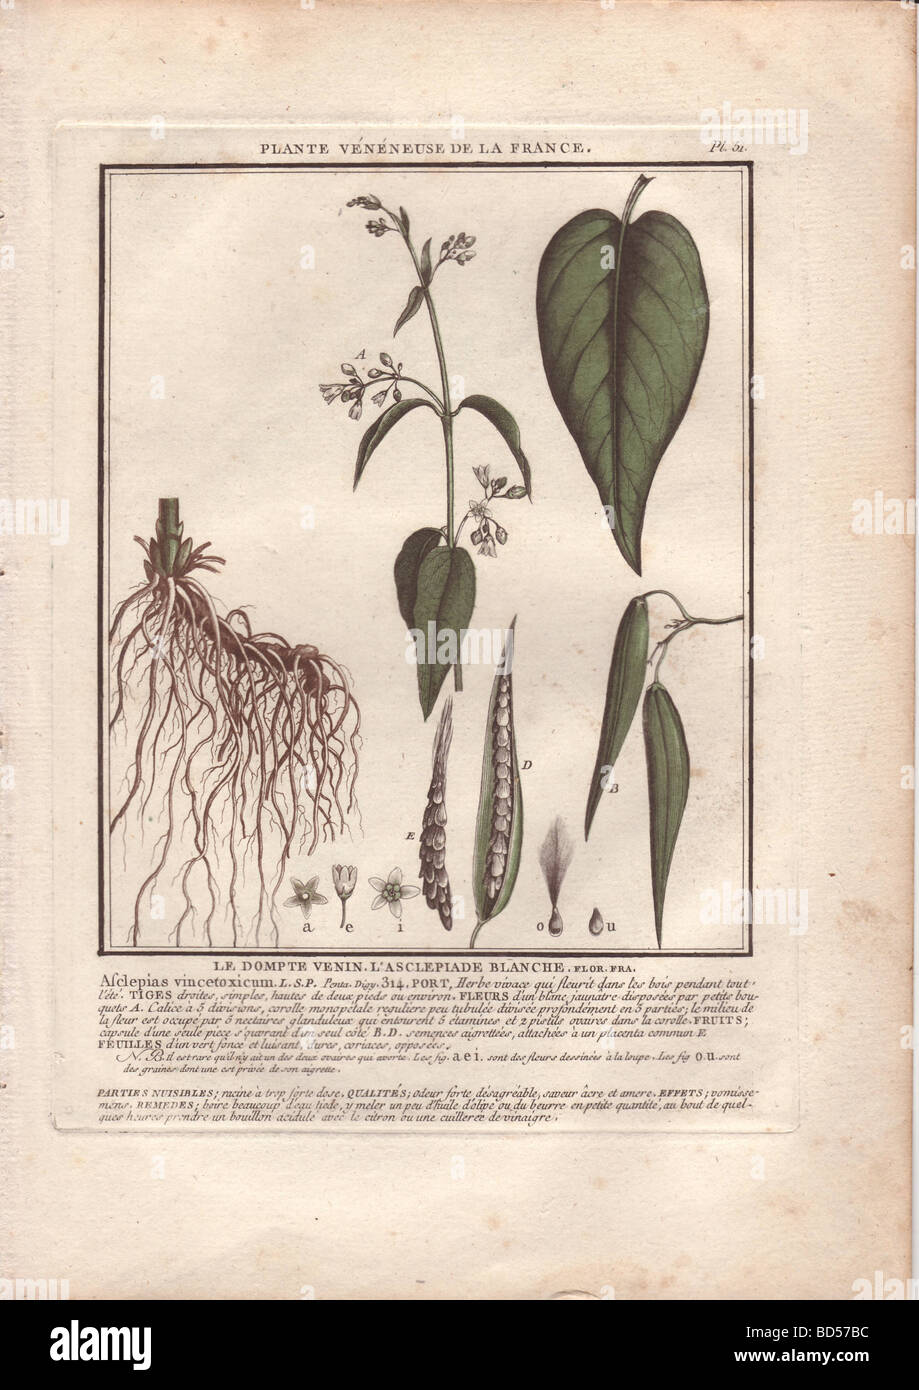 The white swallow-wort (Asclepias vincetoxicum) with roots at left, flower and leaves center, and oval leaves at right. Stock Photo